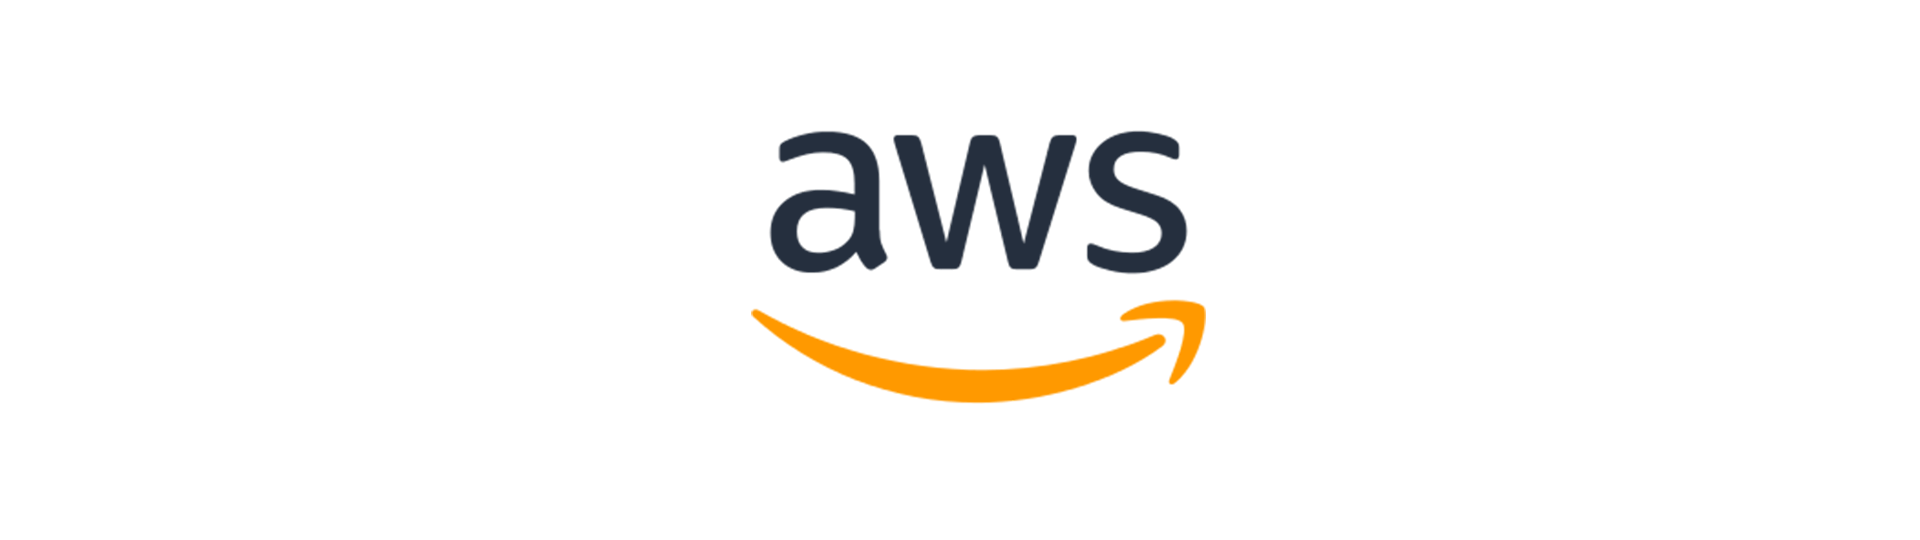 aws-site.png